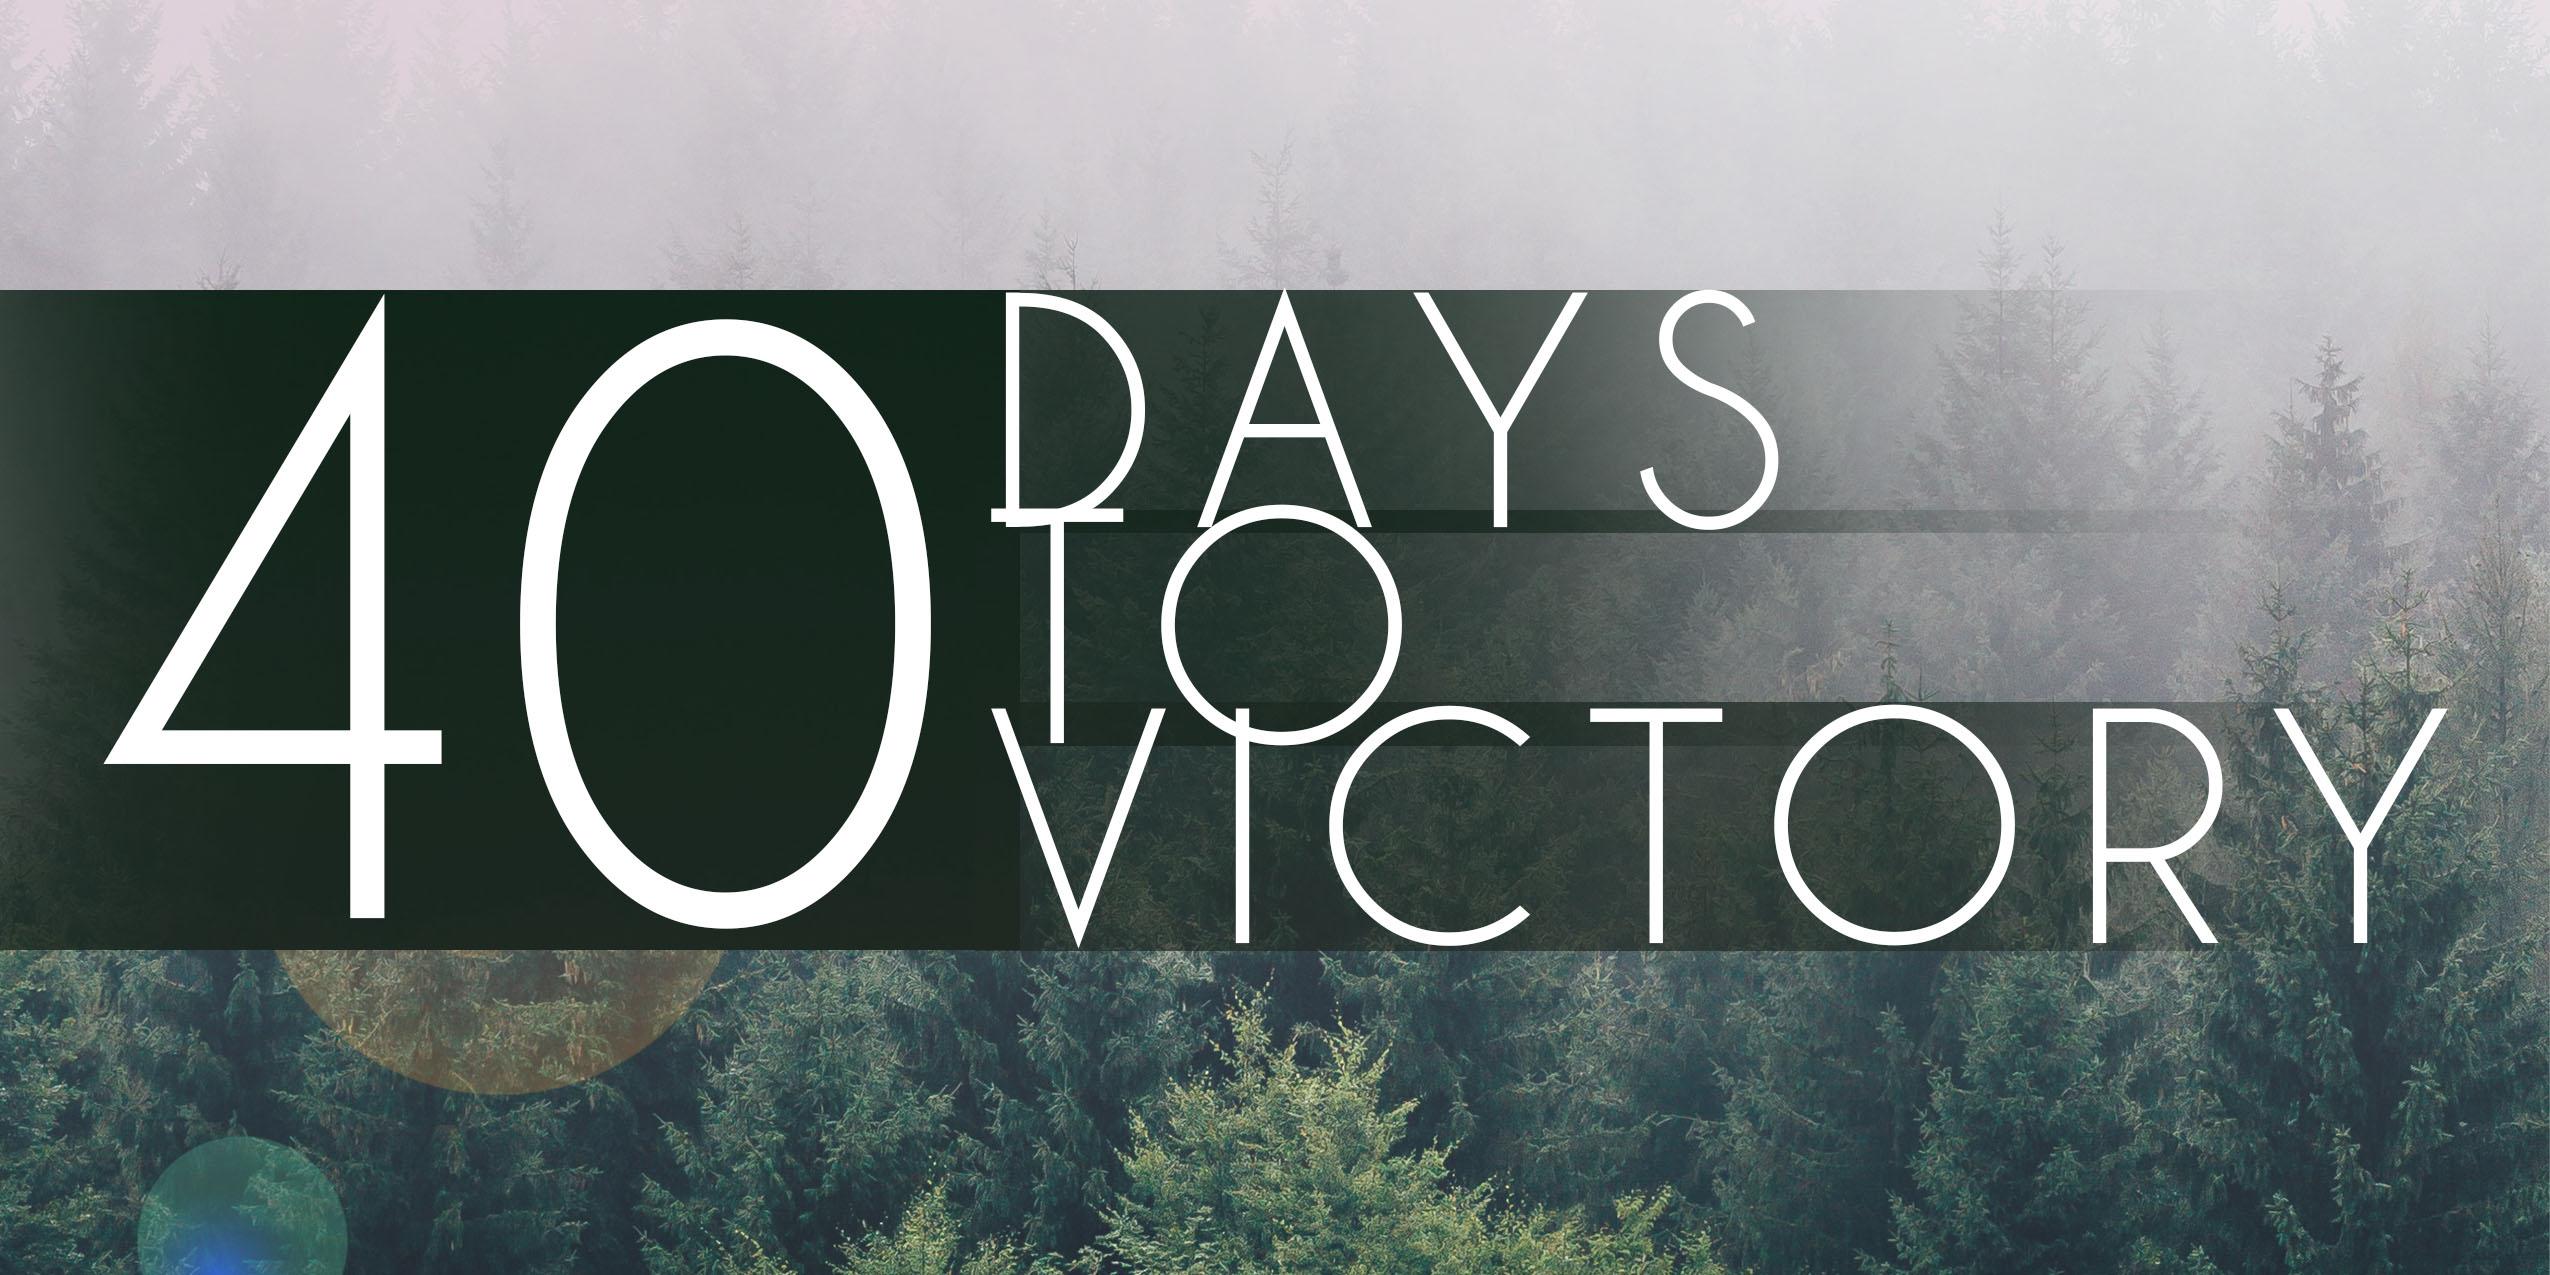 40 Days to Victory: Establish A Daily Self-Care Practice